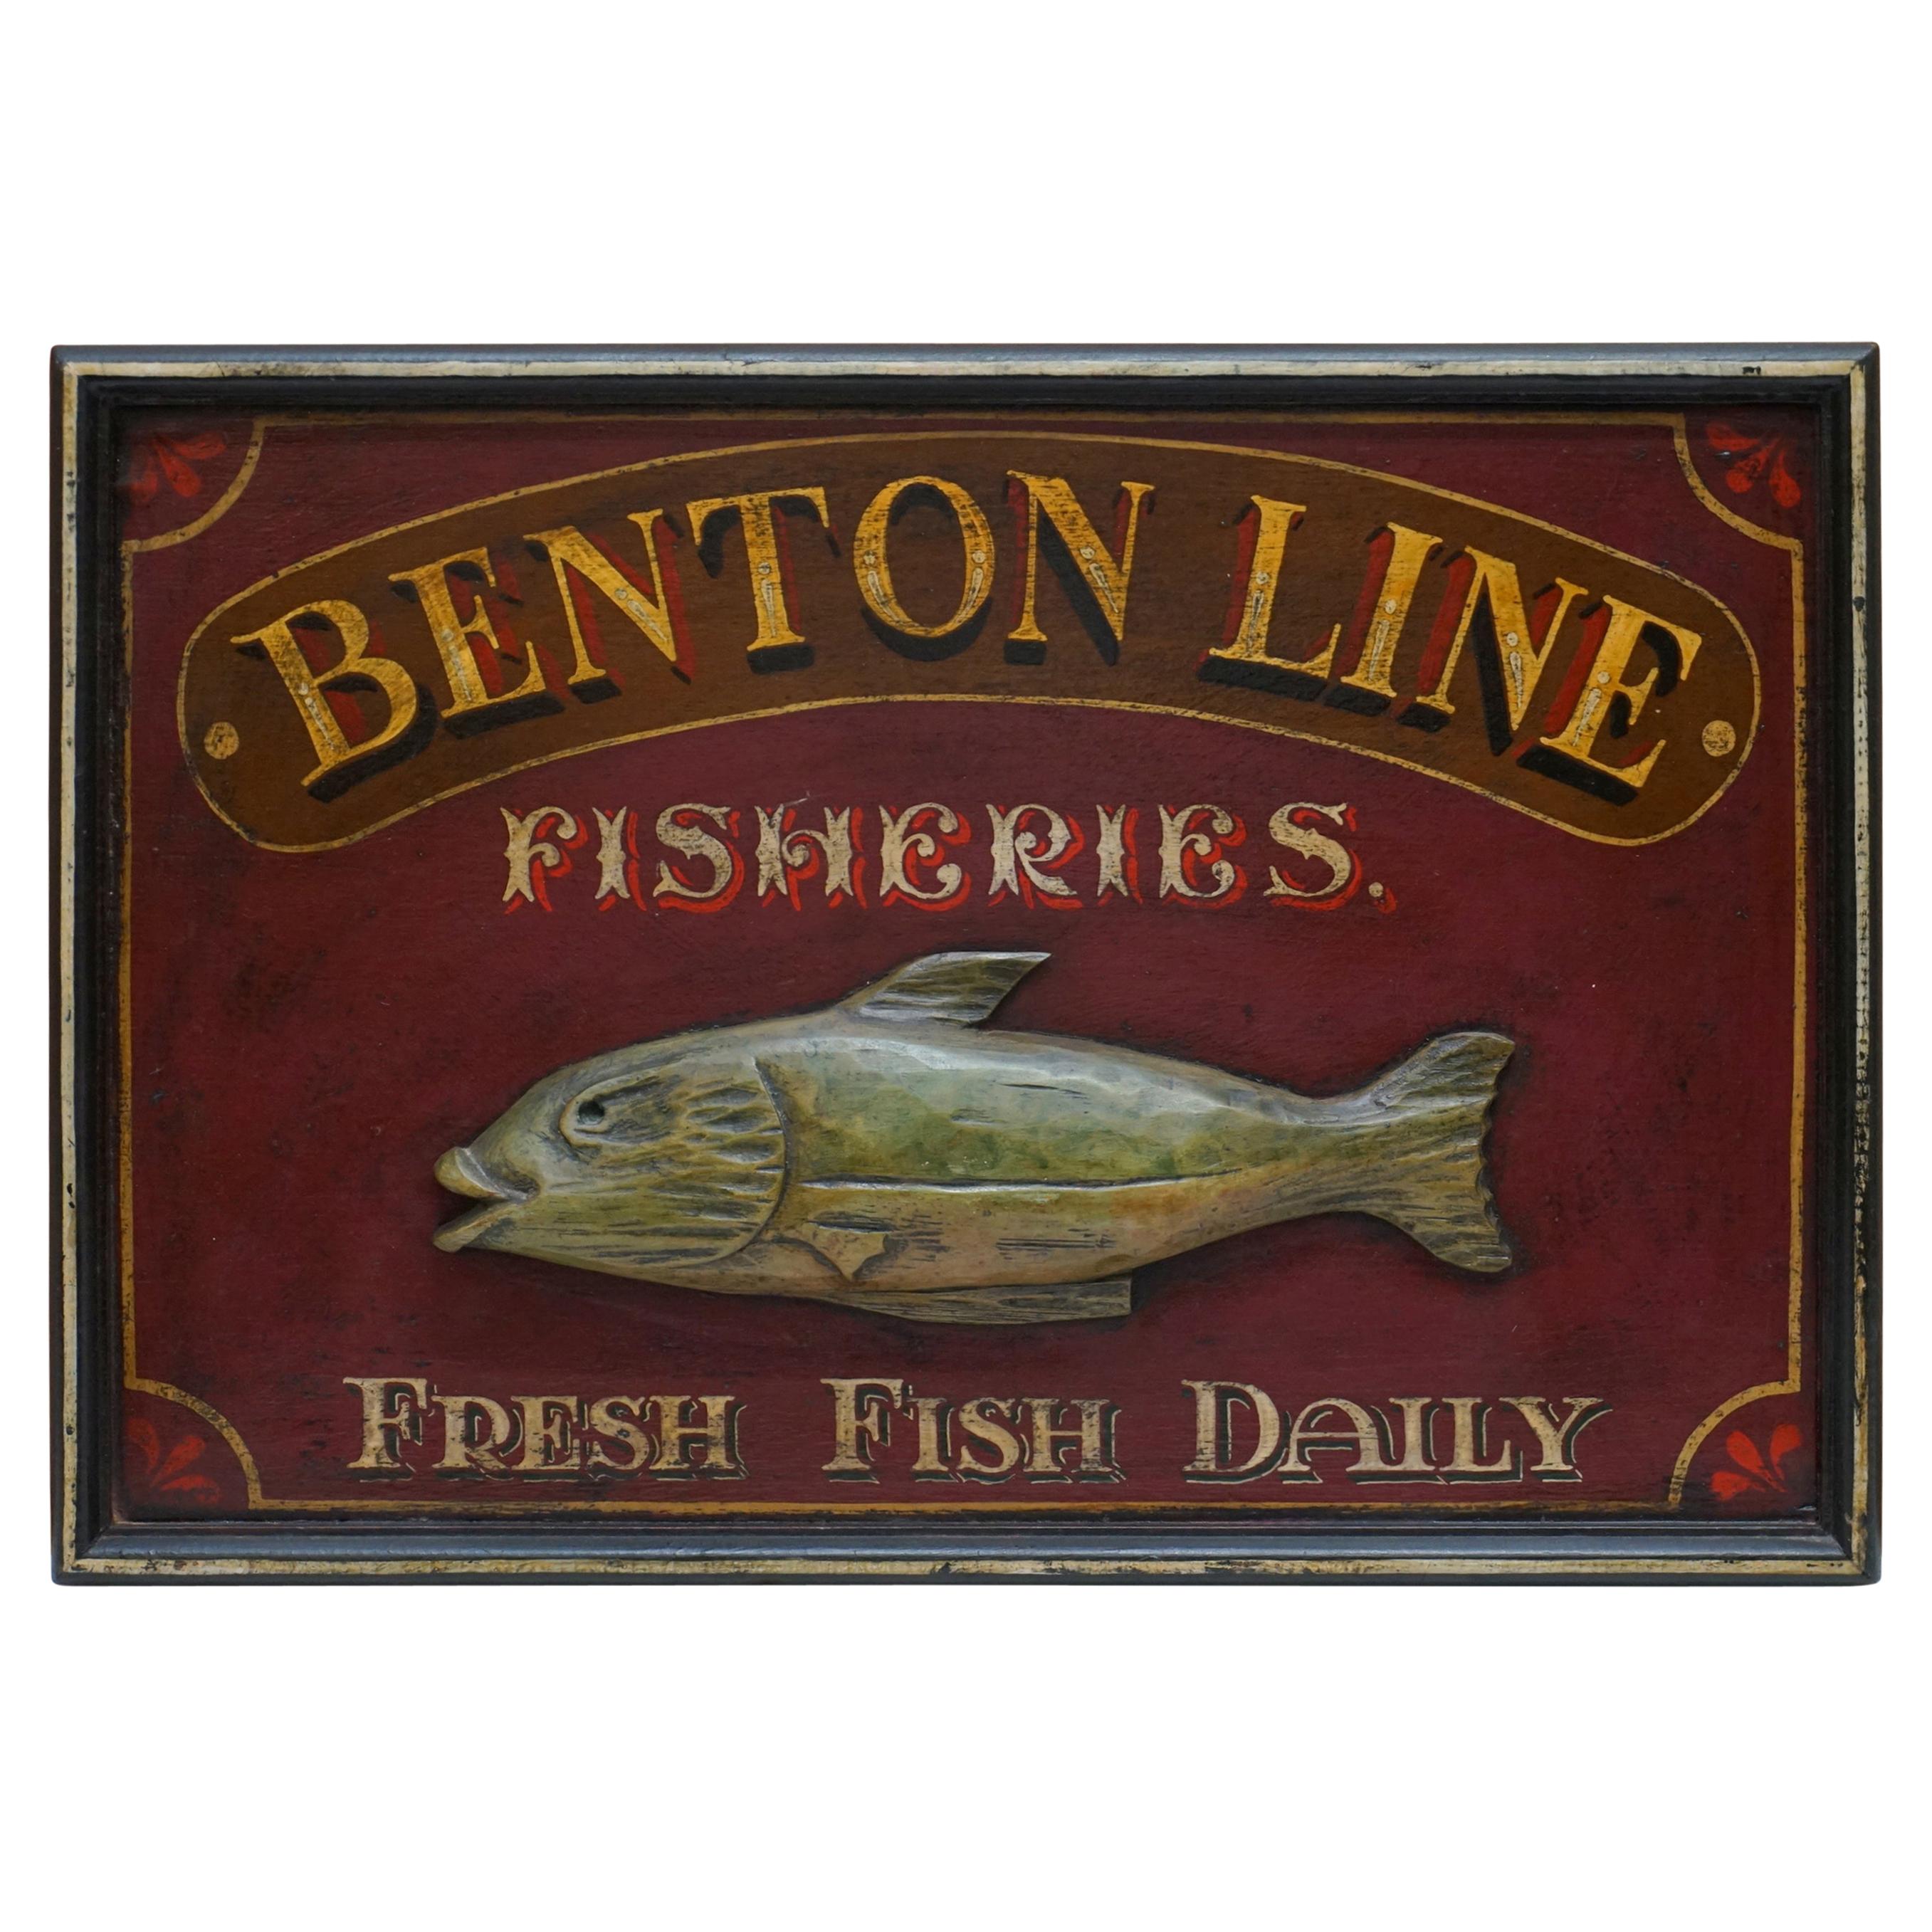 Vintage Style Hand Painted Advertising Sign Benton Line Fishers Fresh Fish Daily